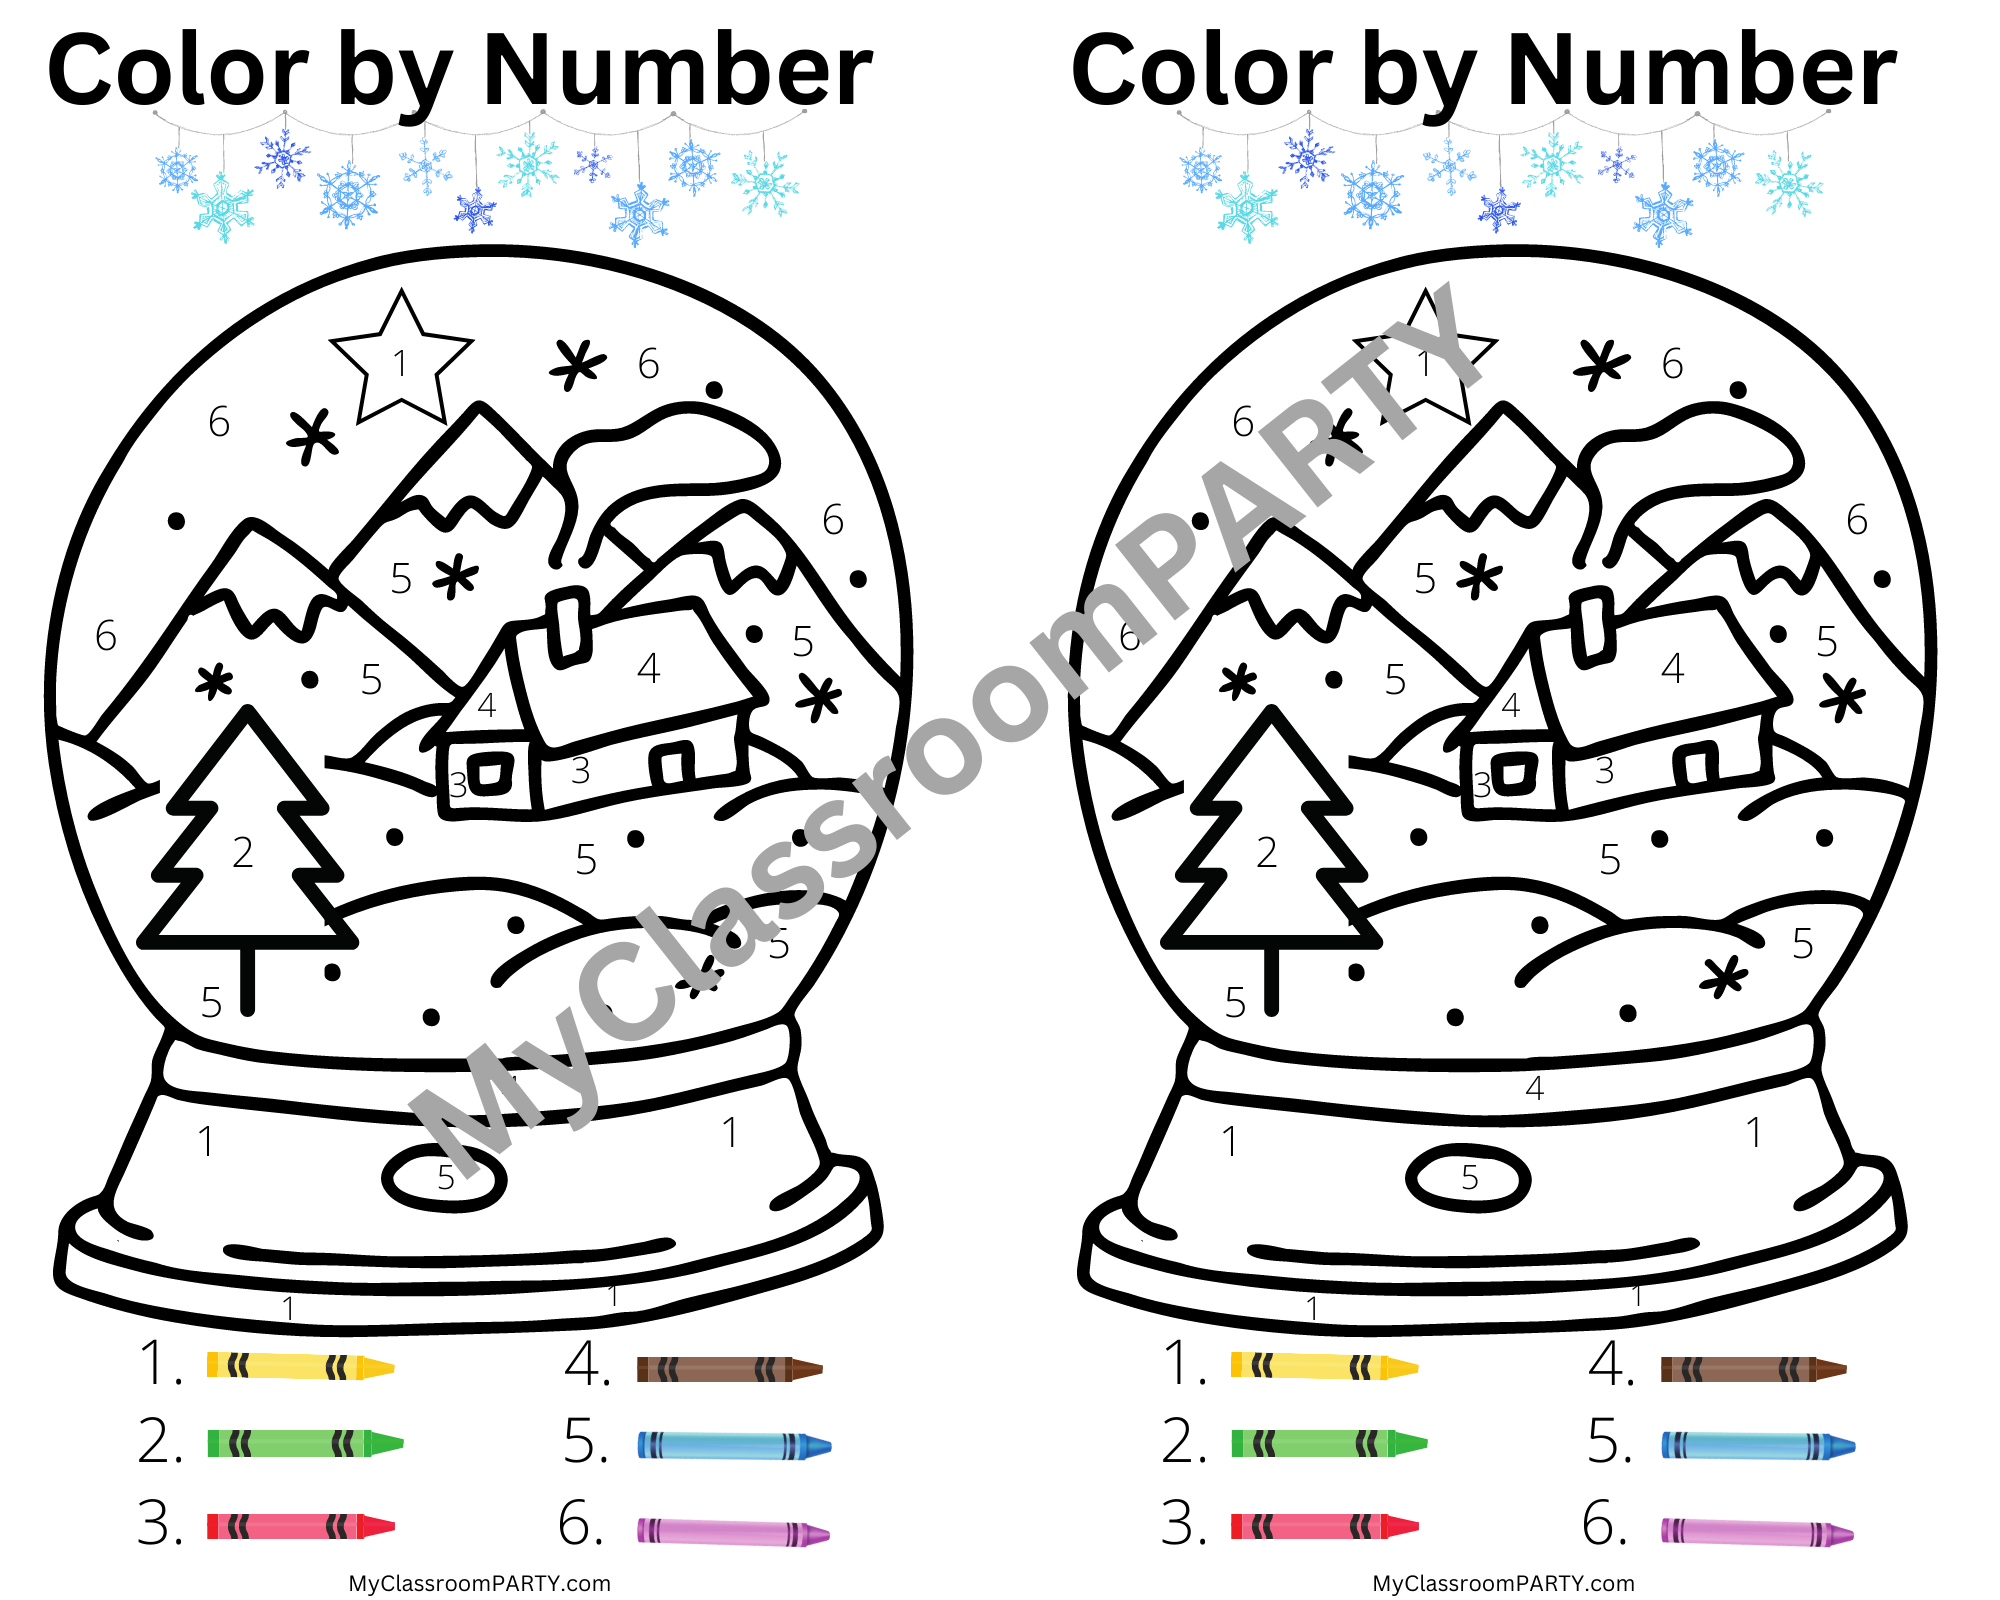 winter-printable-color-by-number-myclassroomparty